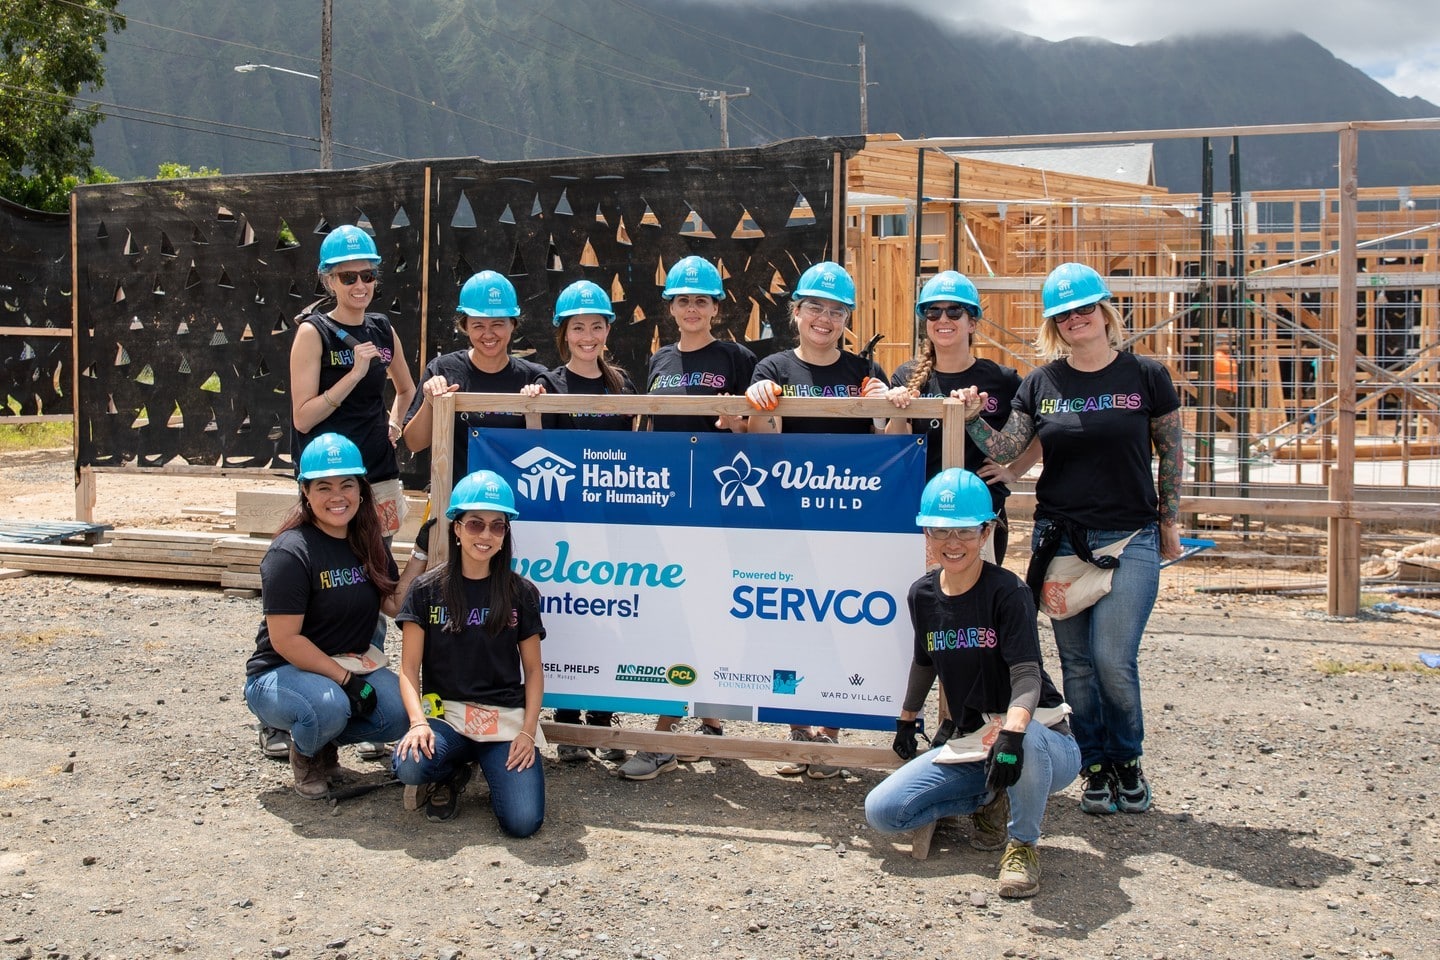 We are proud to once again host a build day this coming May with the@honoluluhabitat Wahine Build program, a community-wide project to mobilize,educate, and empower women to build and advocate for affordable housing onOʻahu. This spring, more than 200 women will build a Habitat for Humanityhome from foundation to finish. Visit the link in our bio to learn more.